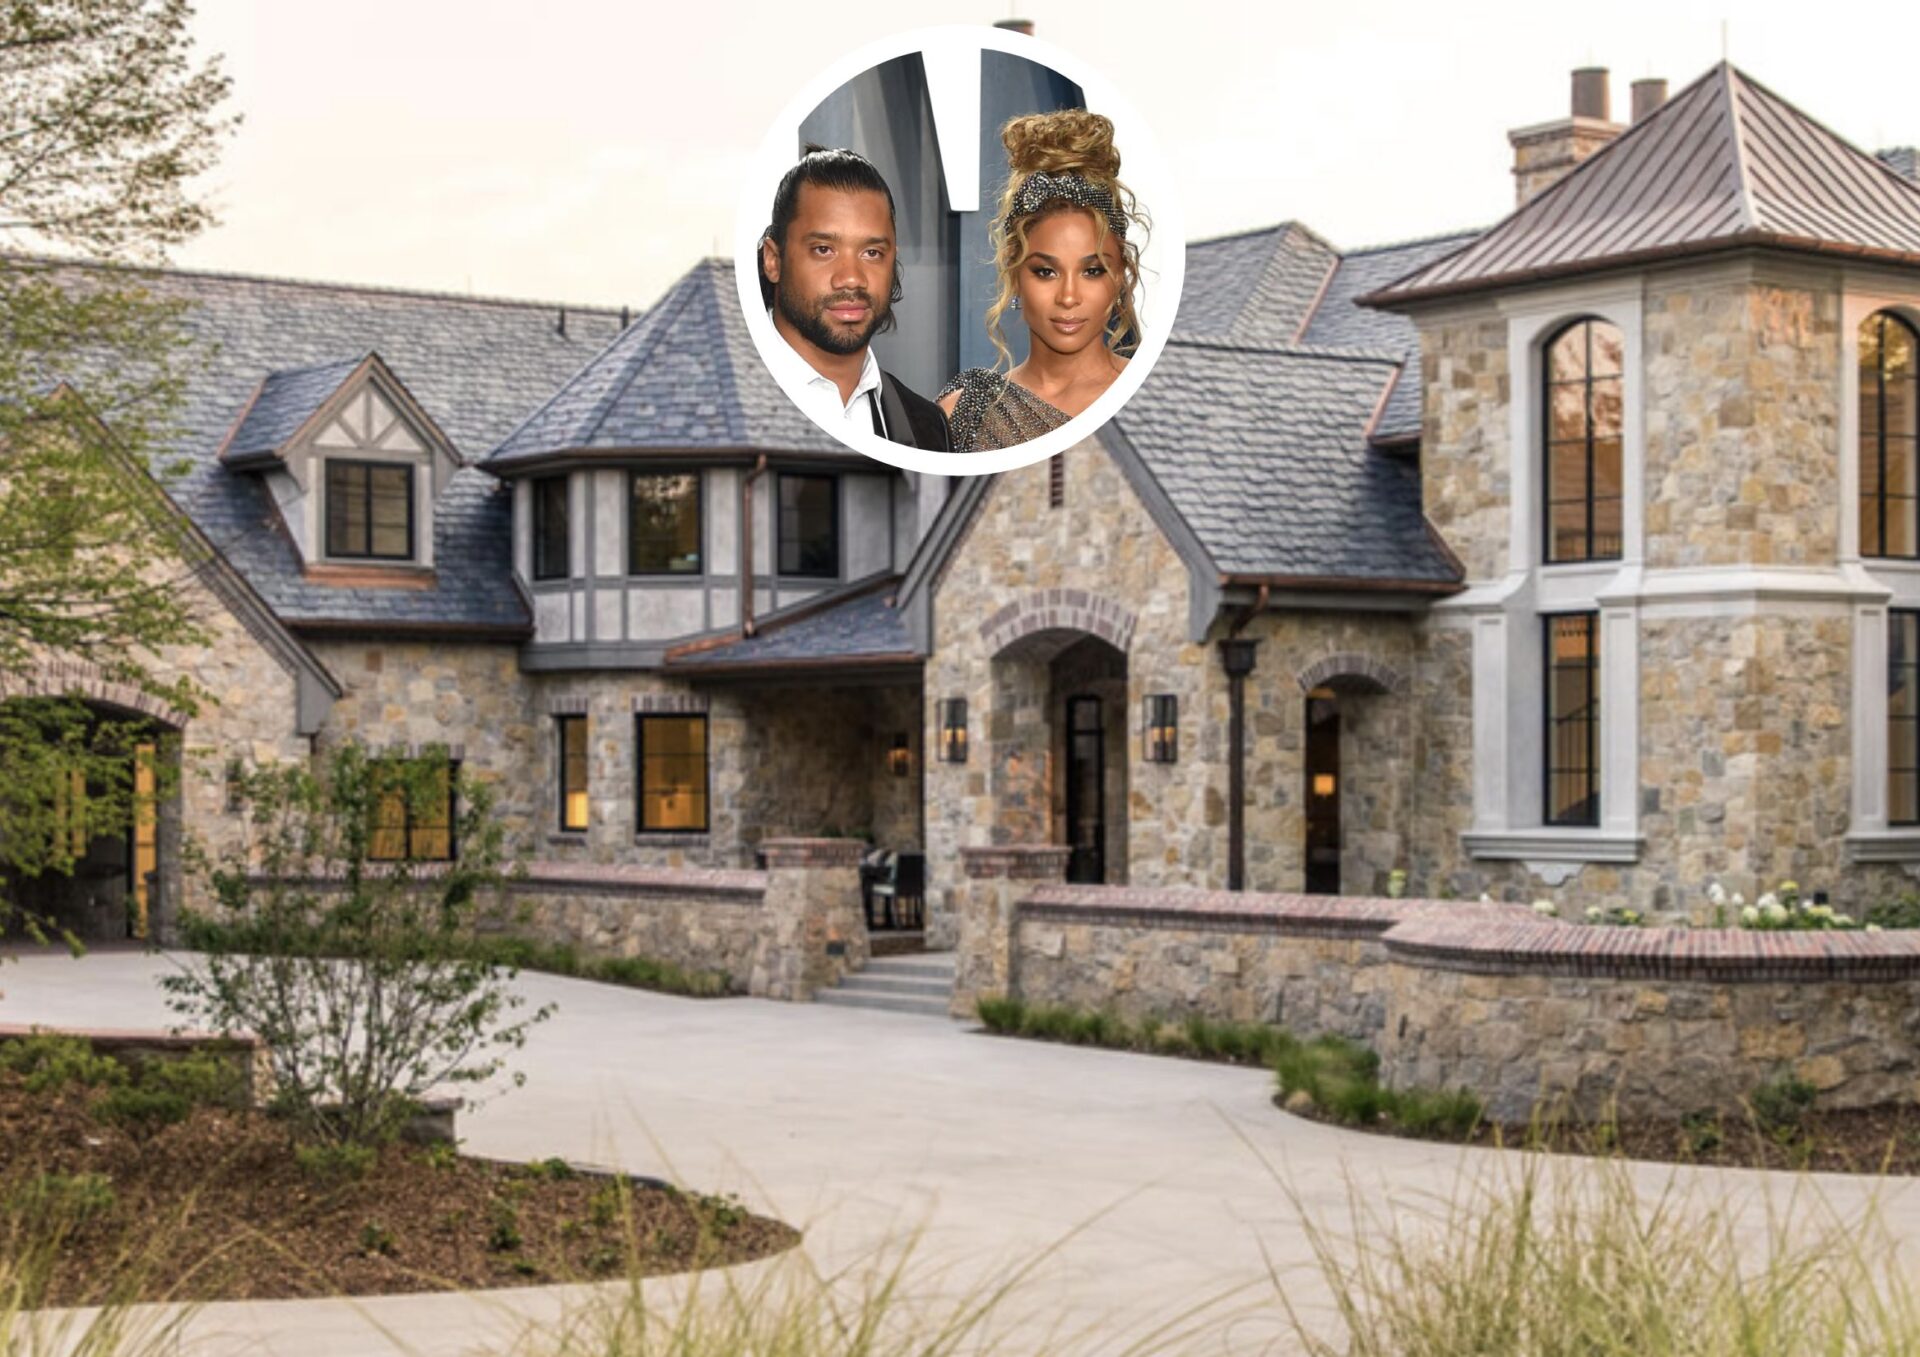 Main Image of Ciara and Russell Wilson's Estate